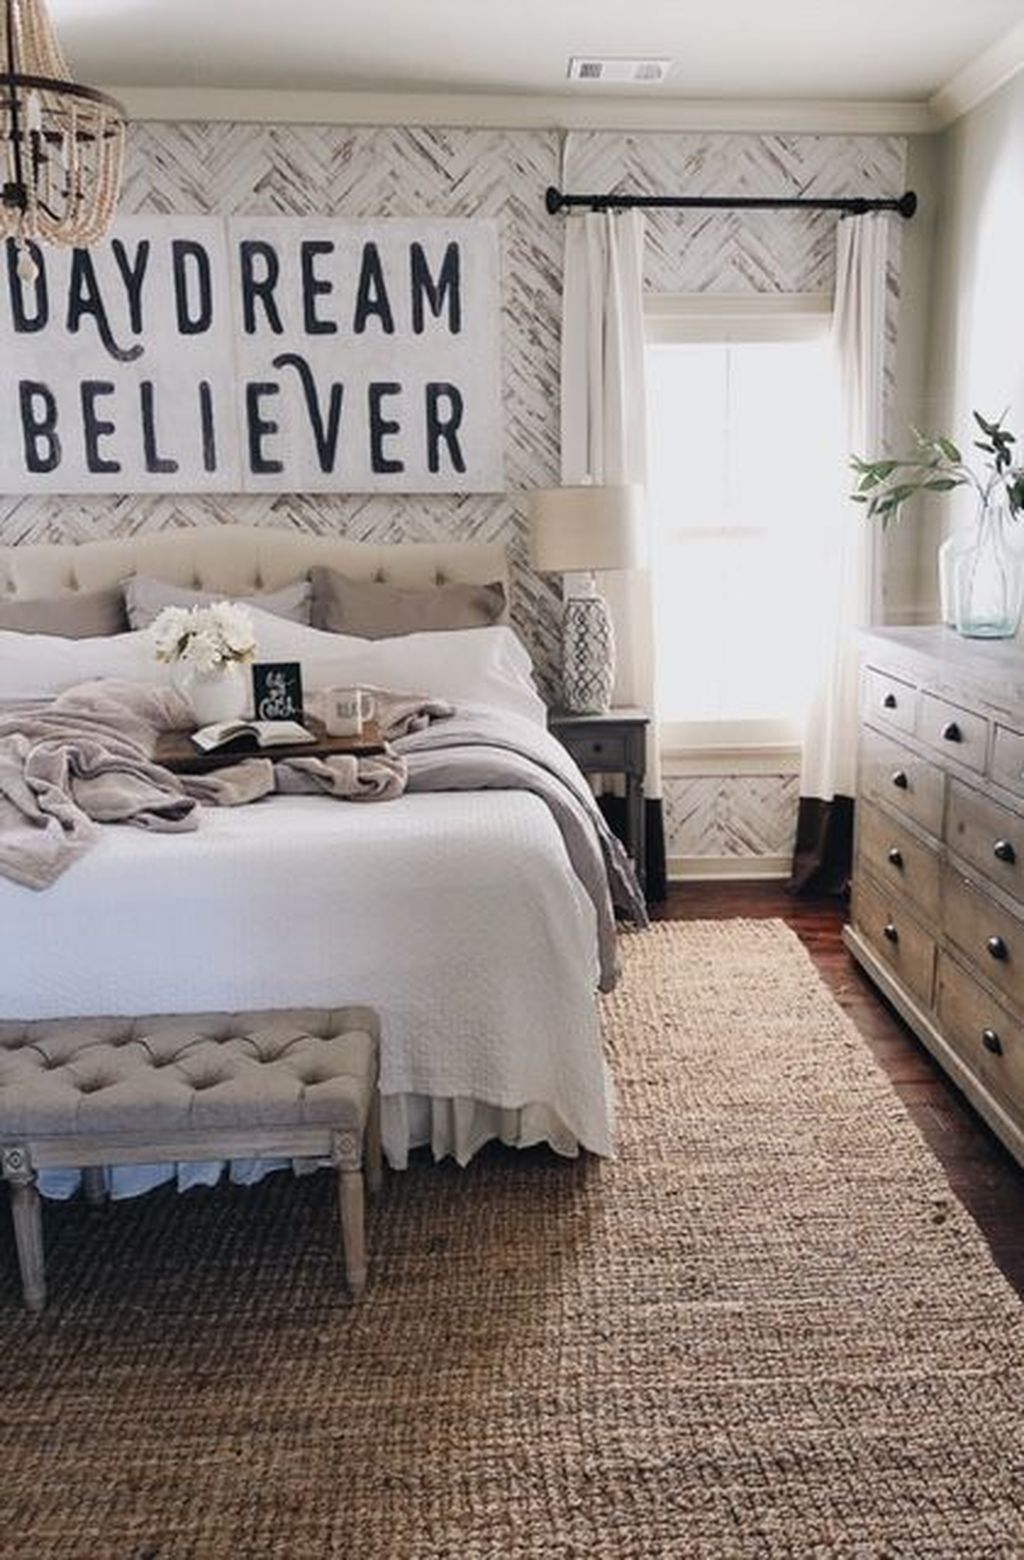 Admiring Bedroom Decor Ideas To Have Right Now 21